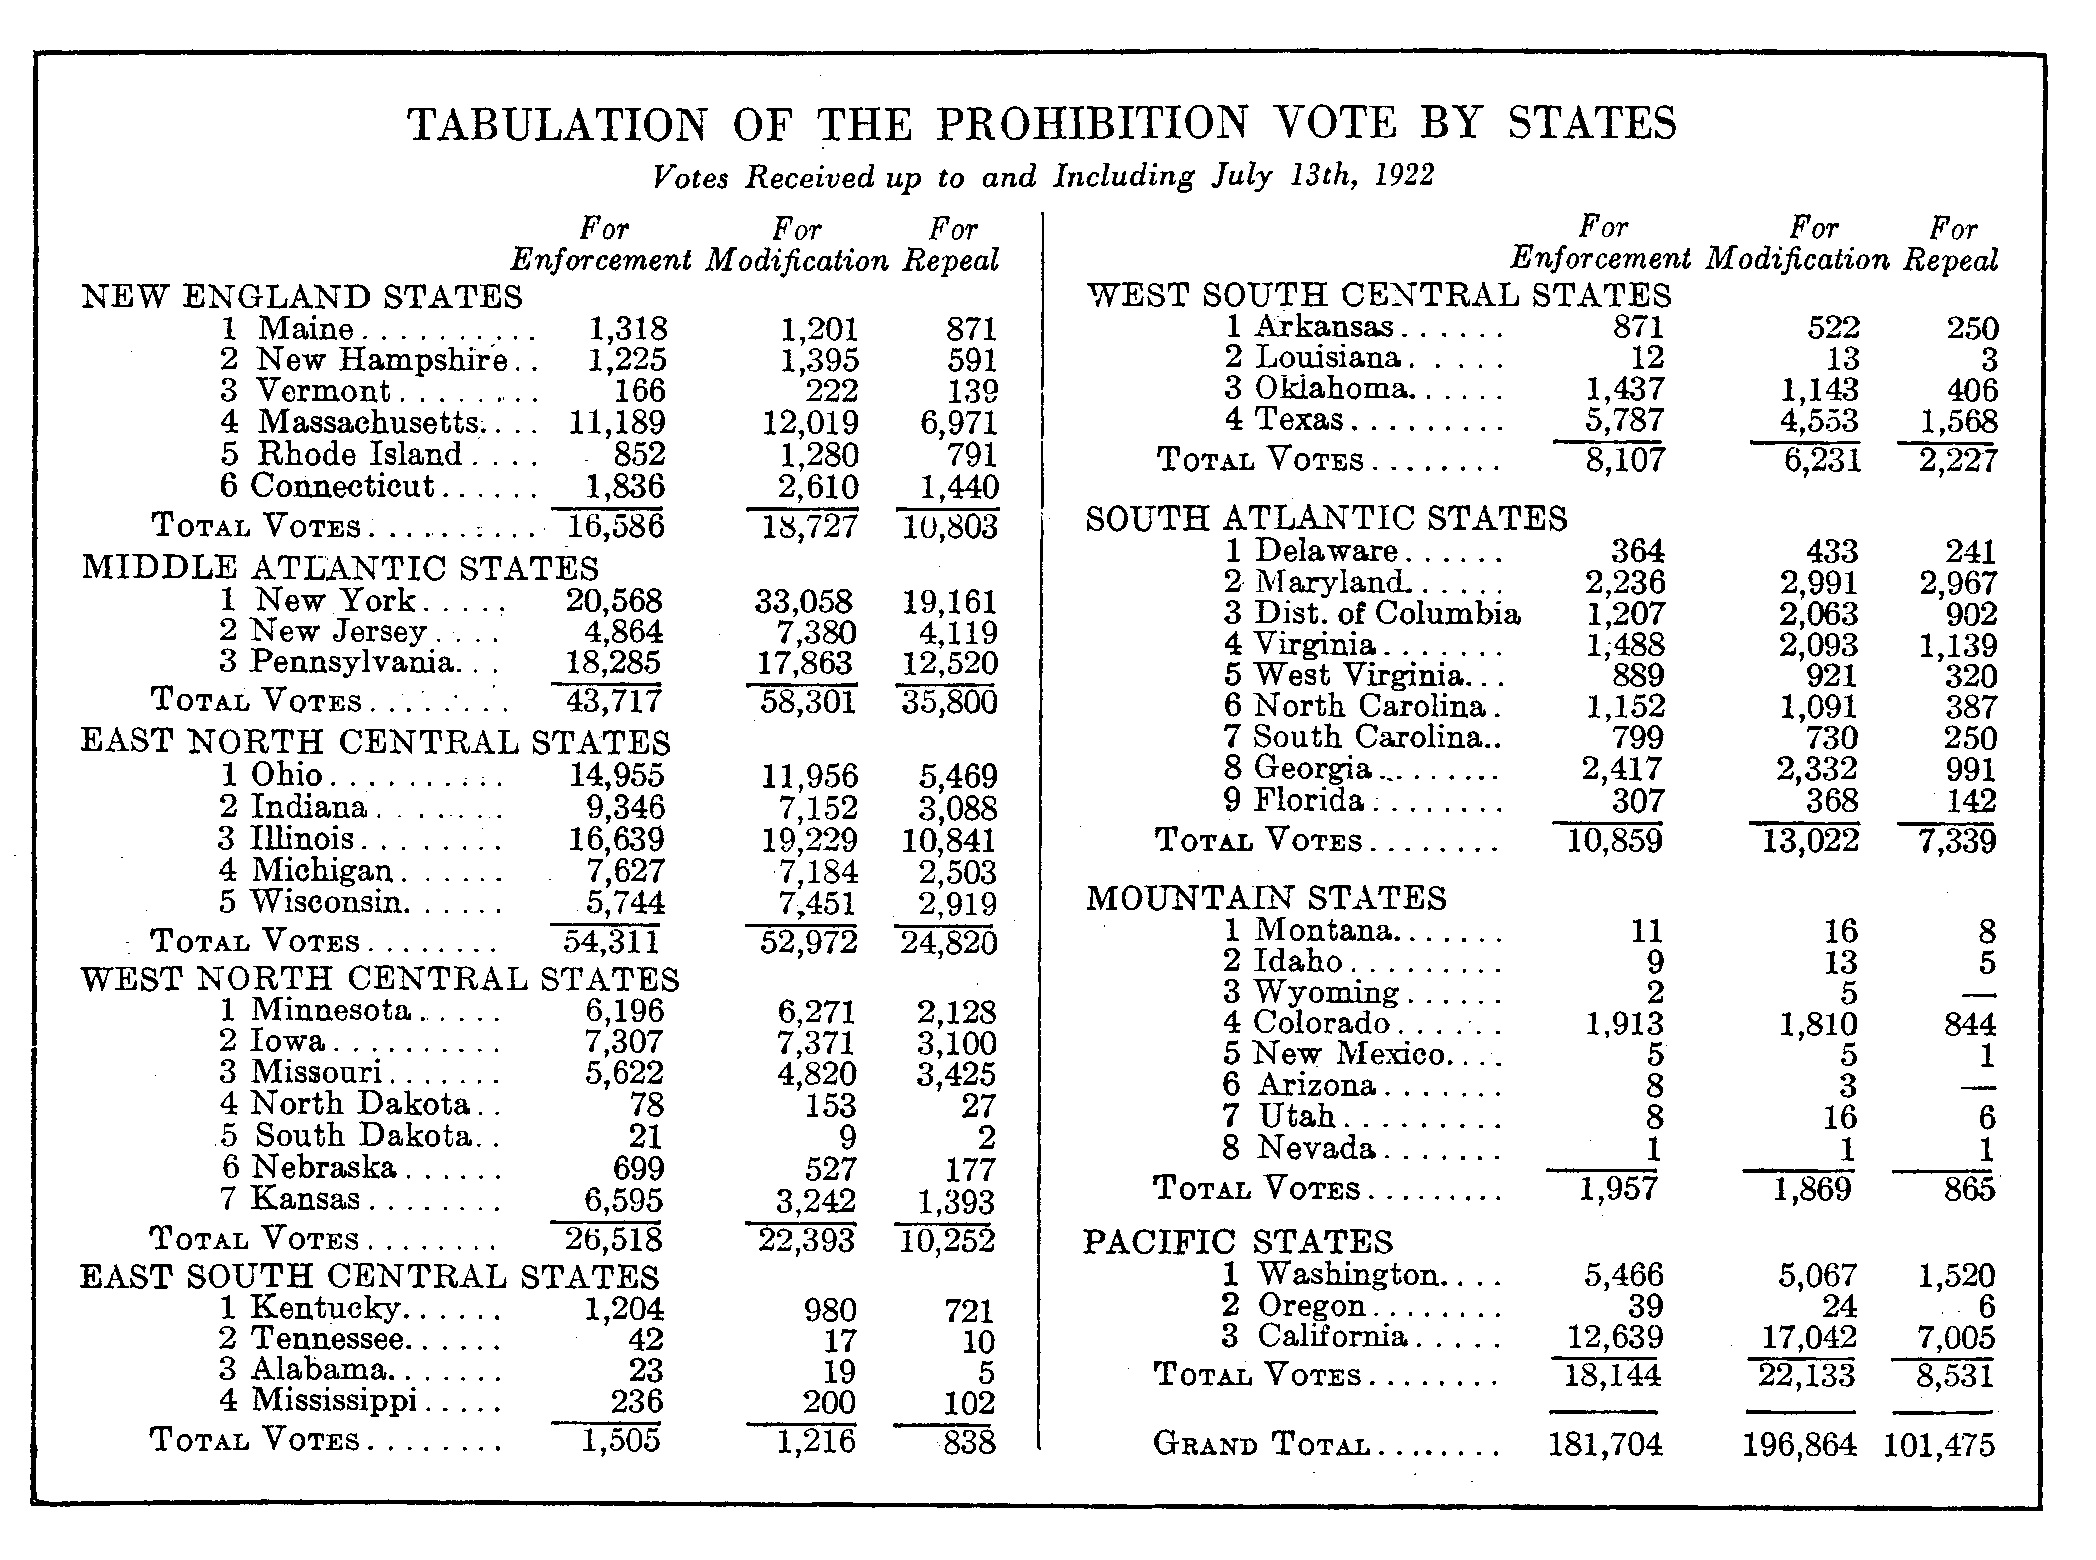 Tabulation of the vote by states